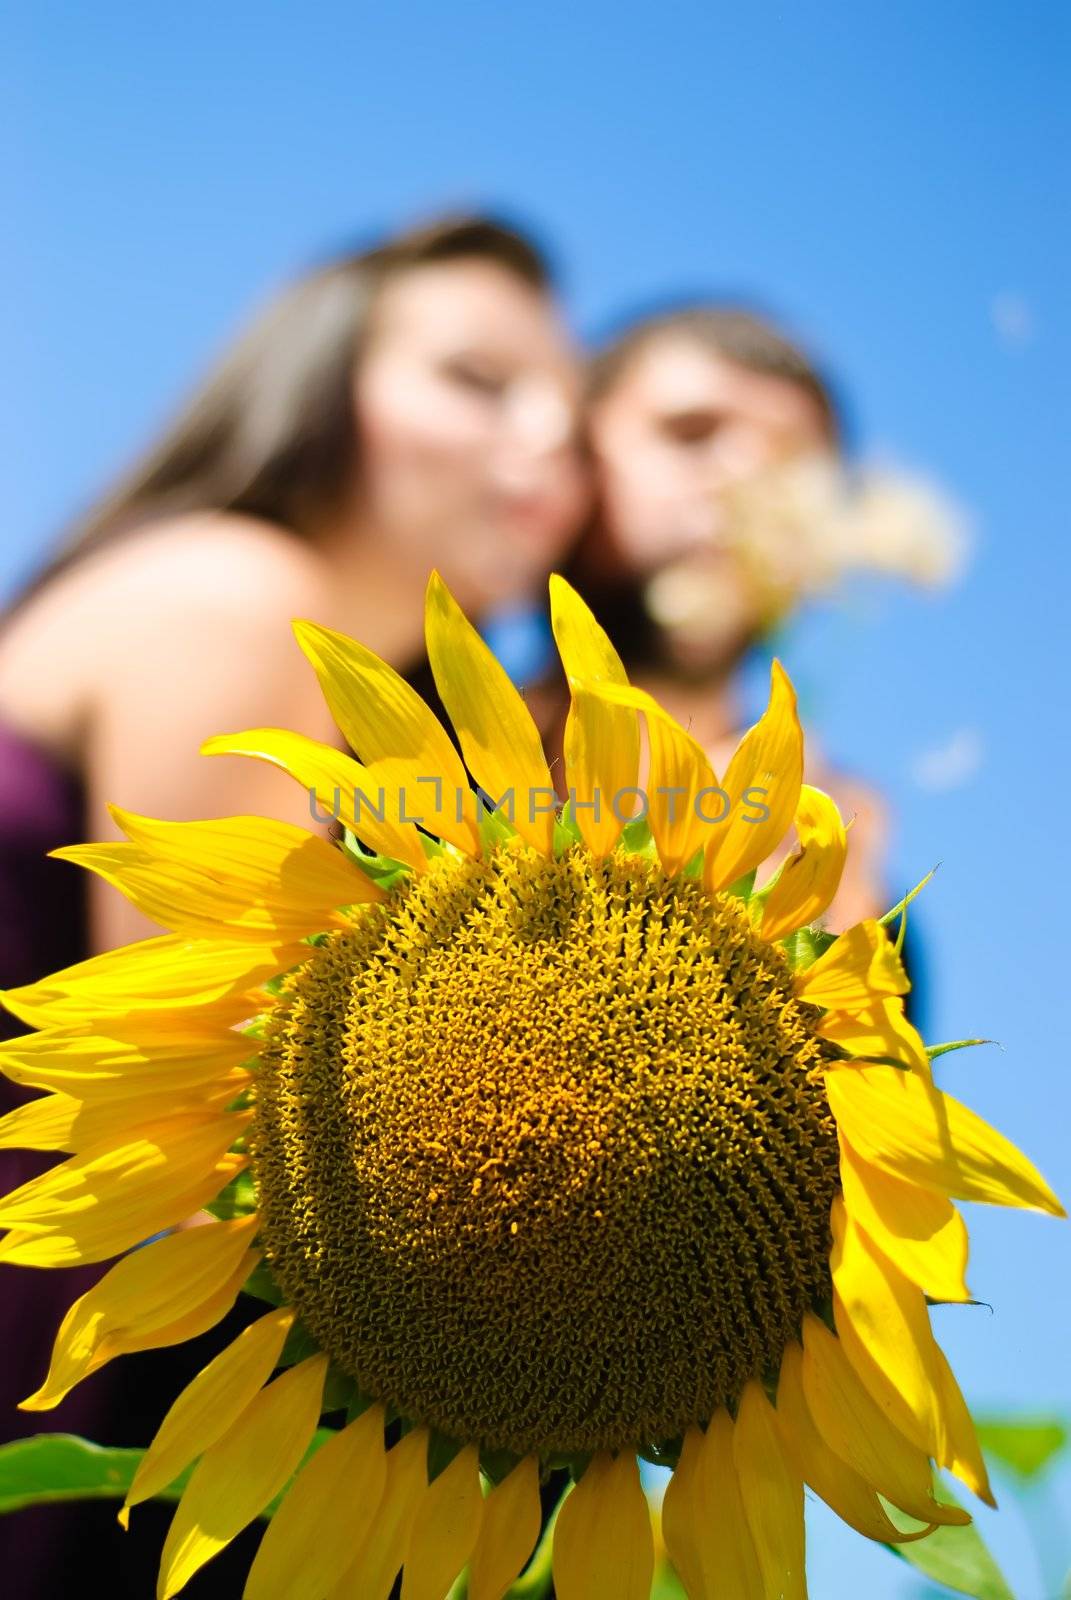 Sunflower and blurred young couple on the background